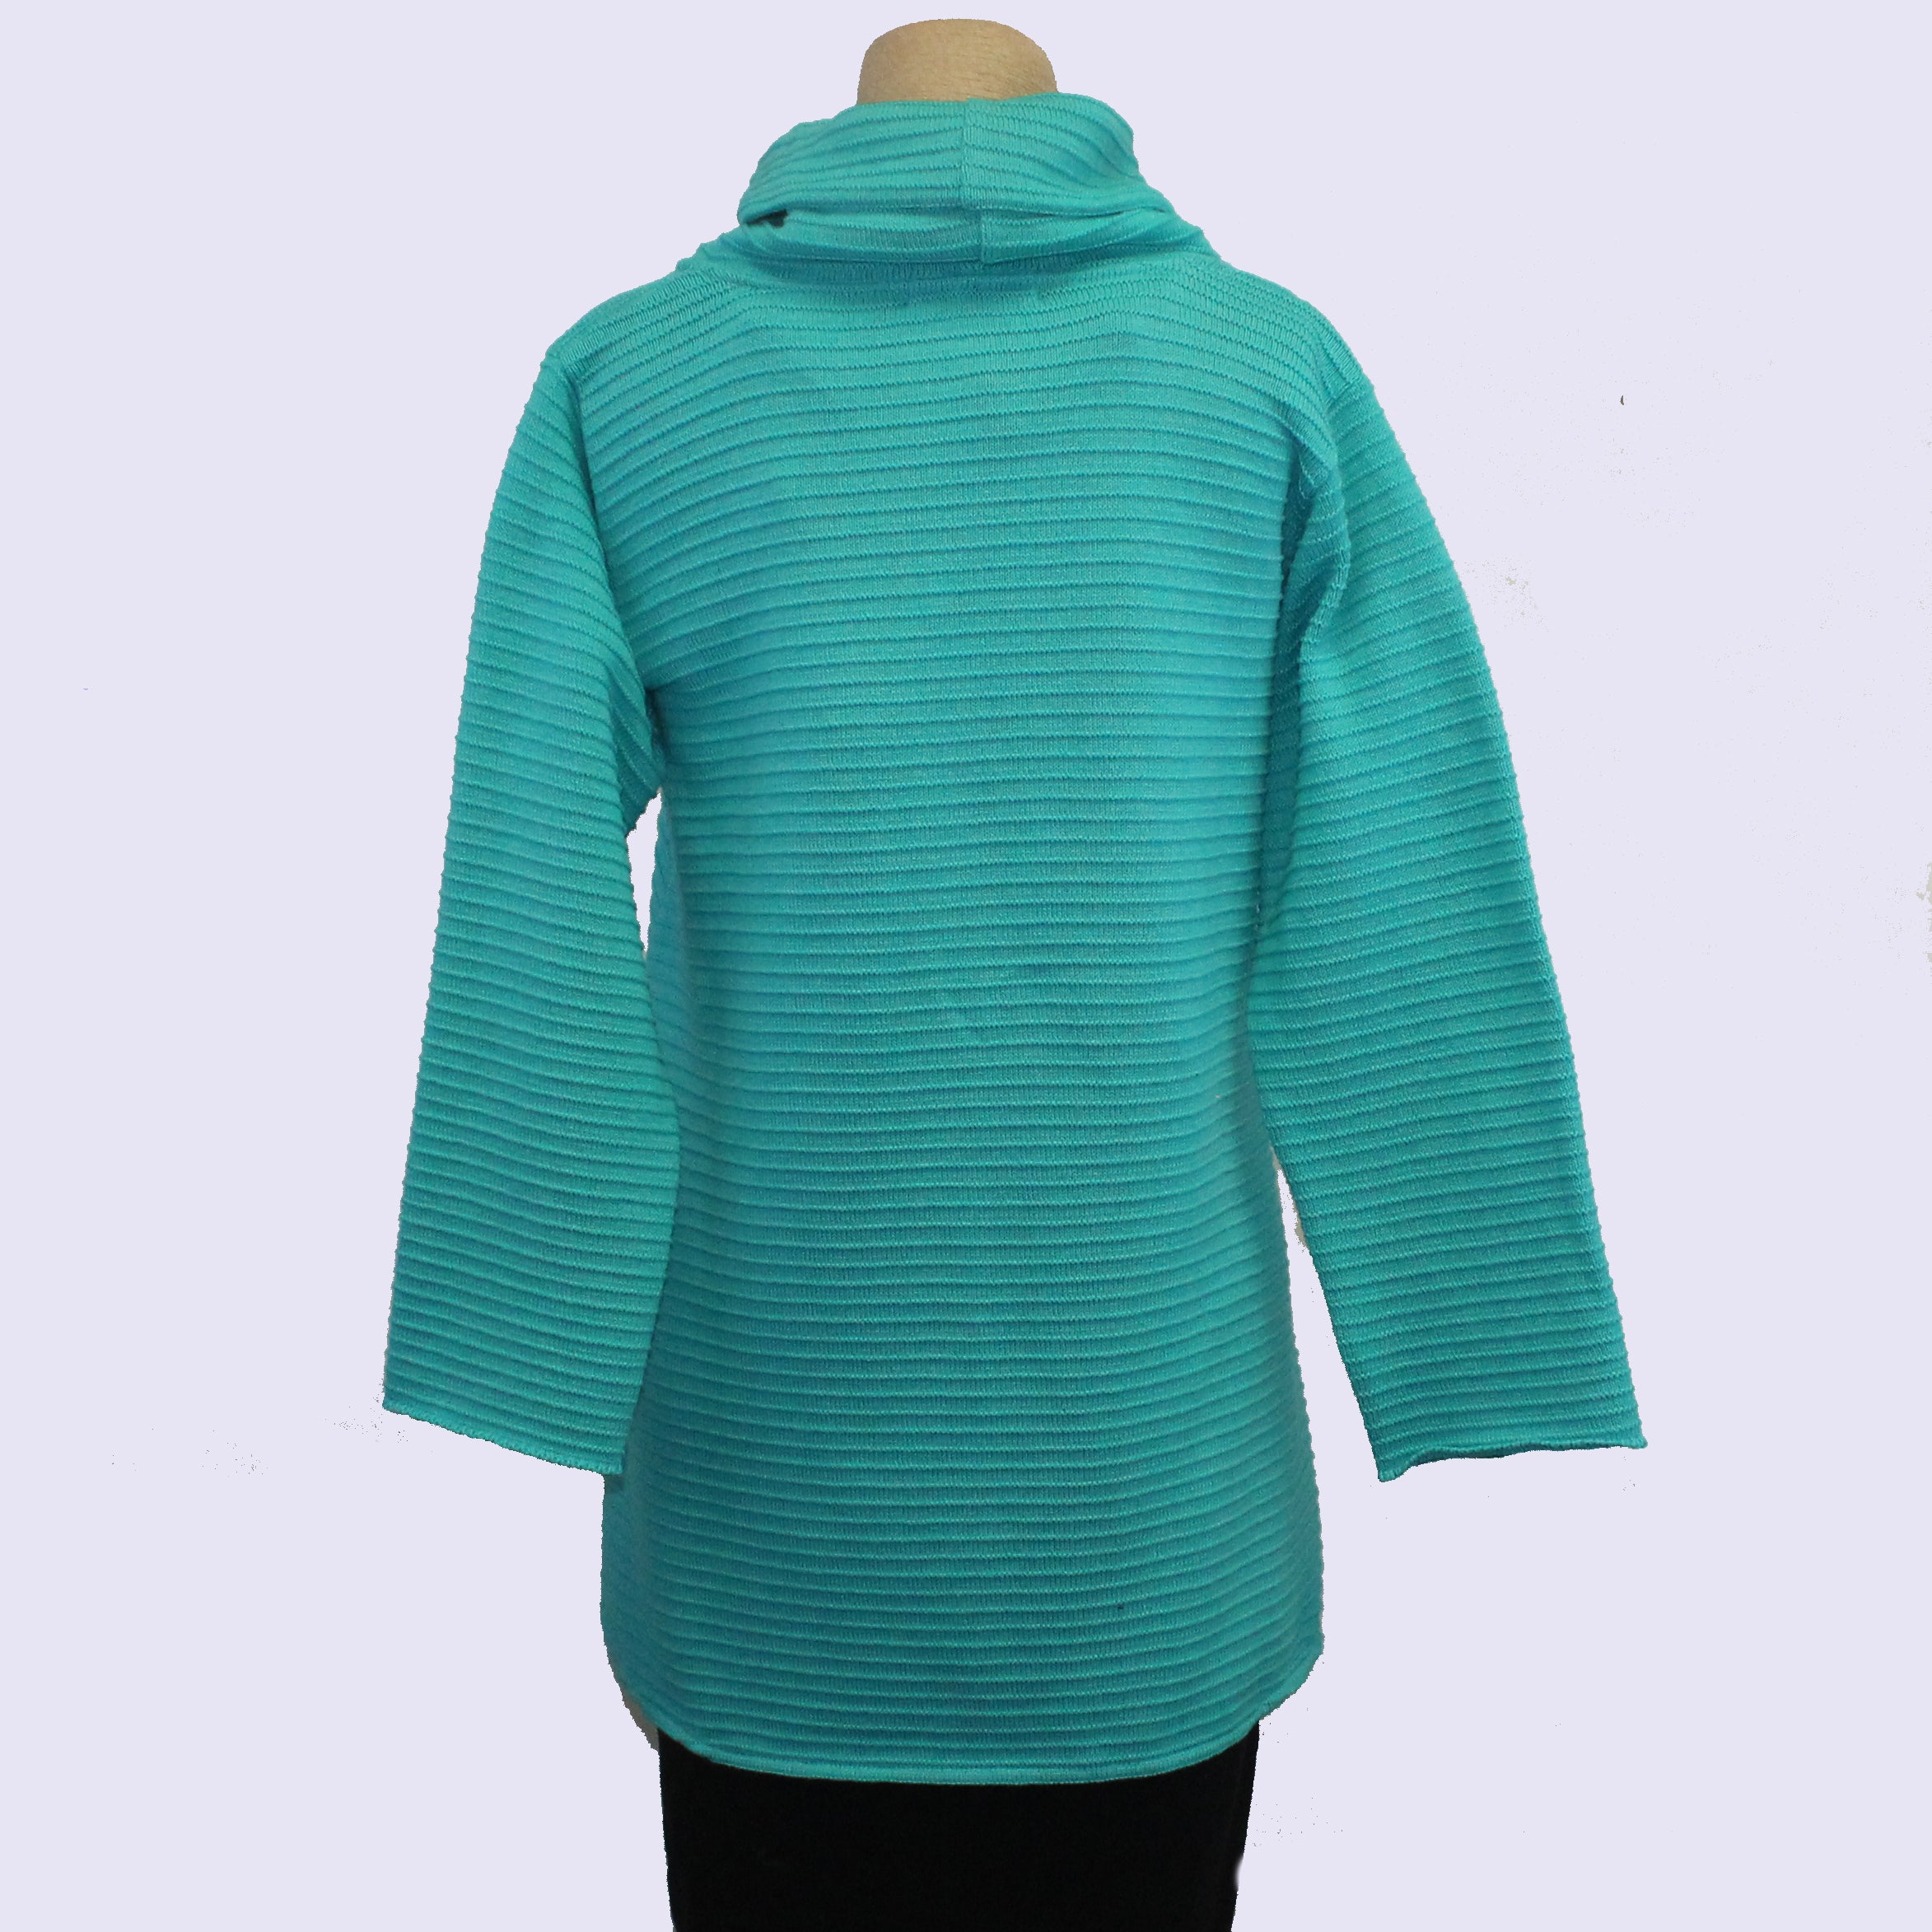 Margaret Winters Sweater, Turquoise XS, S